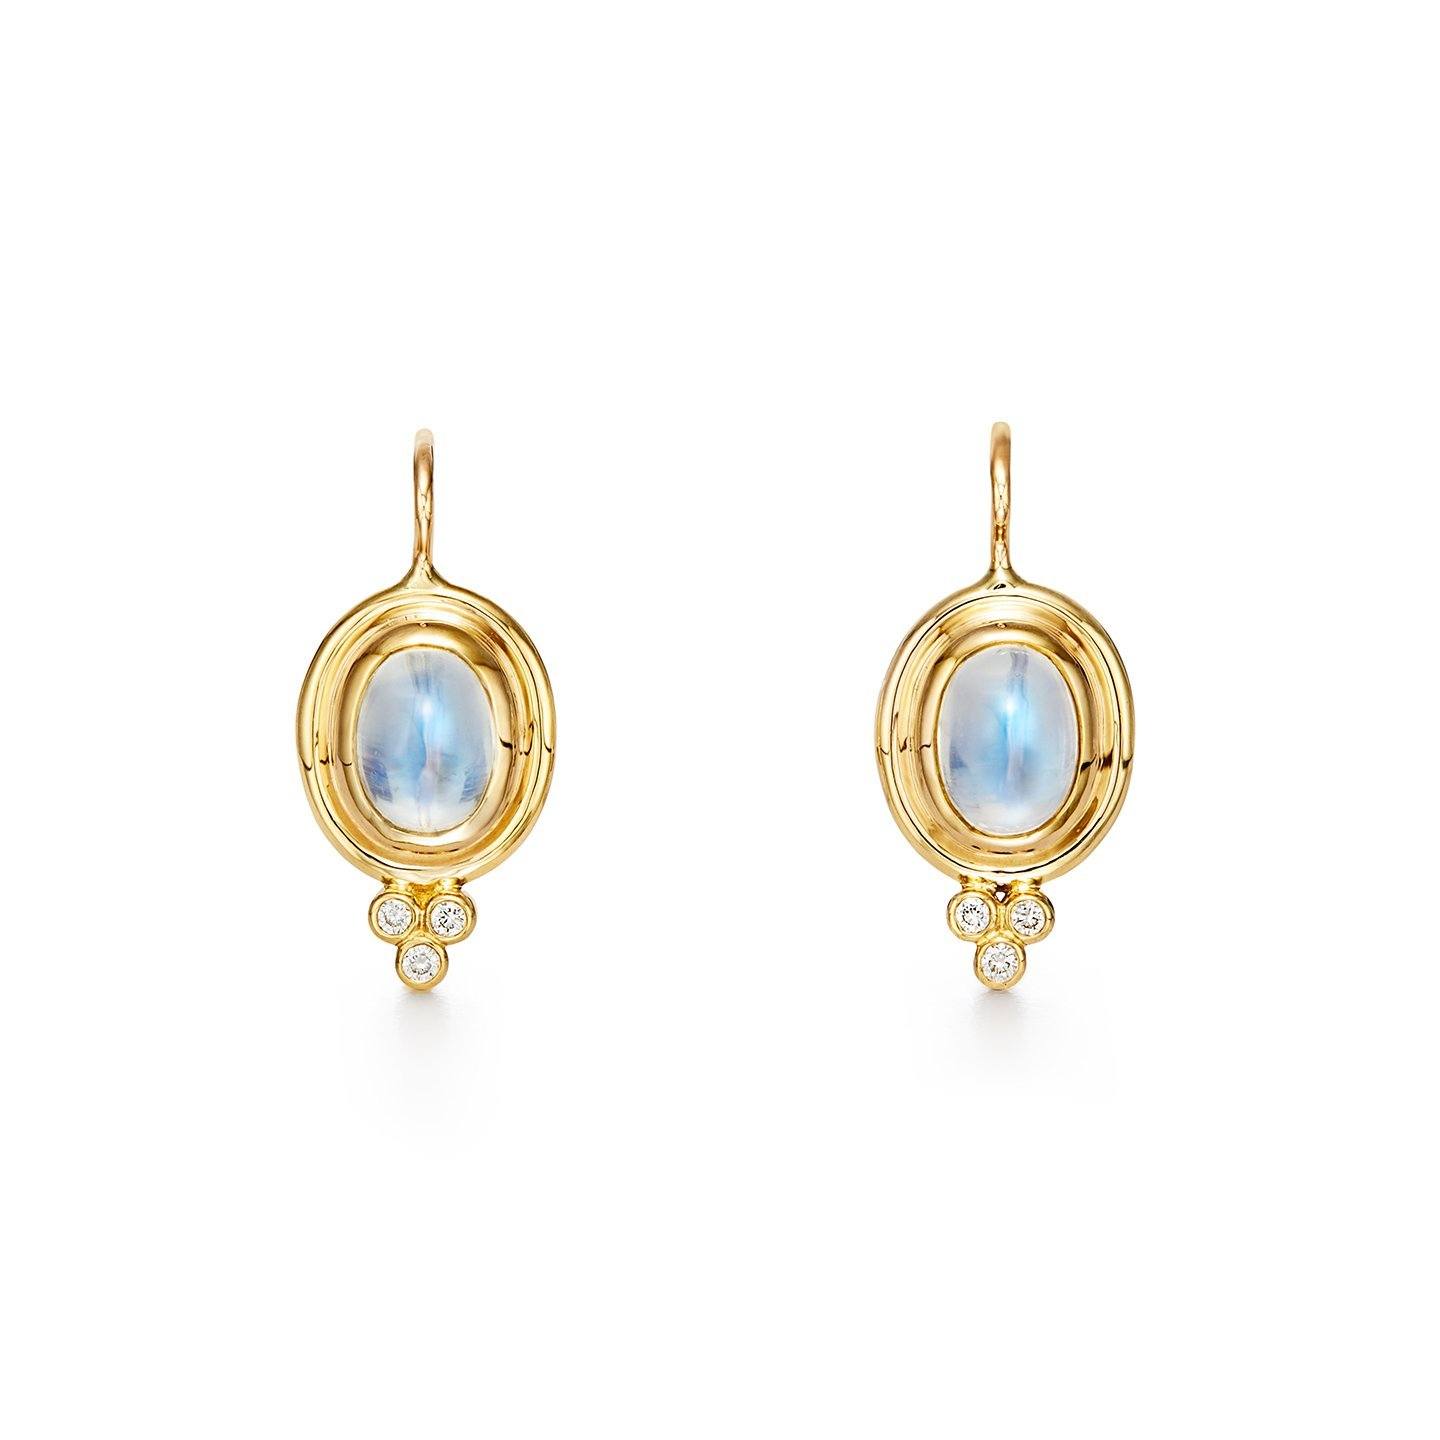 Temple St. Clair 18k Classic Temple Earrings 